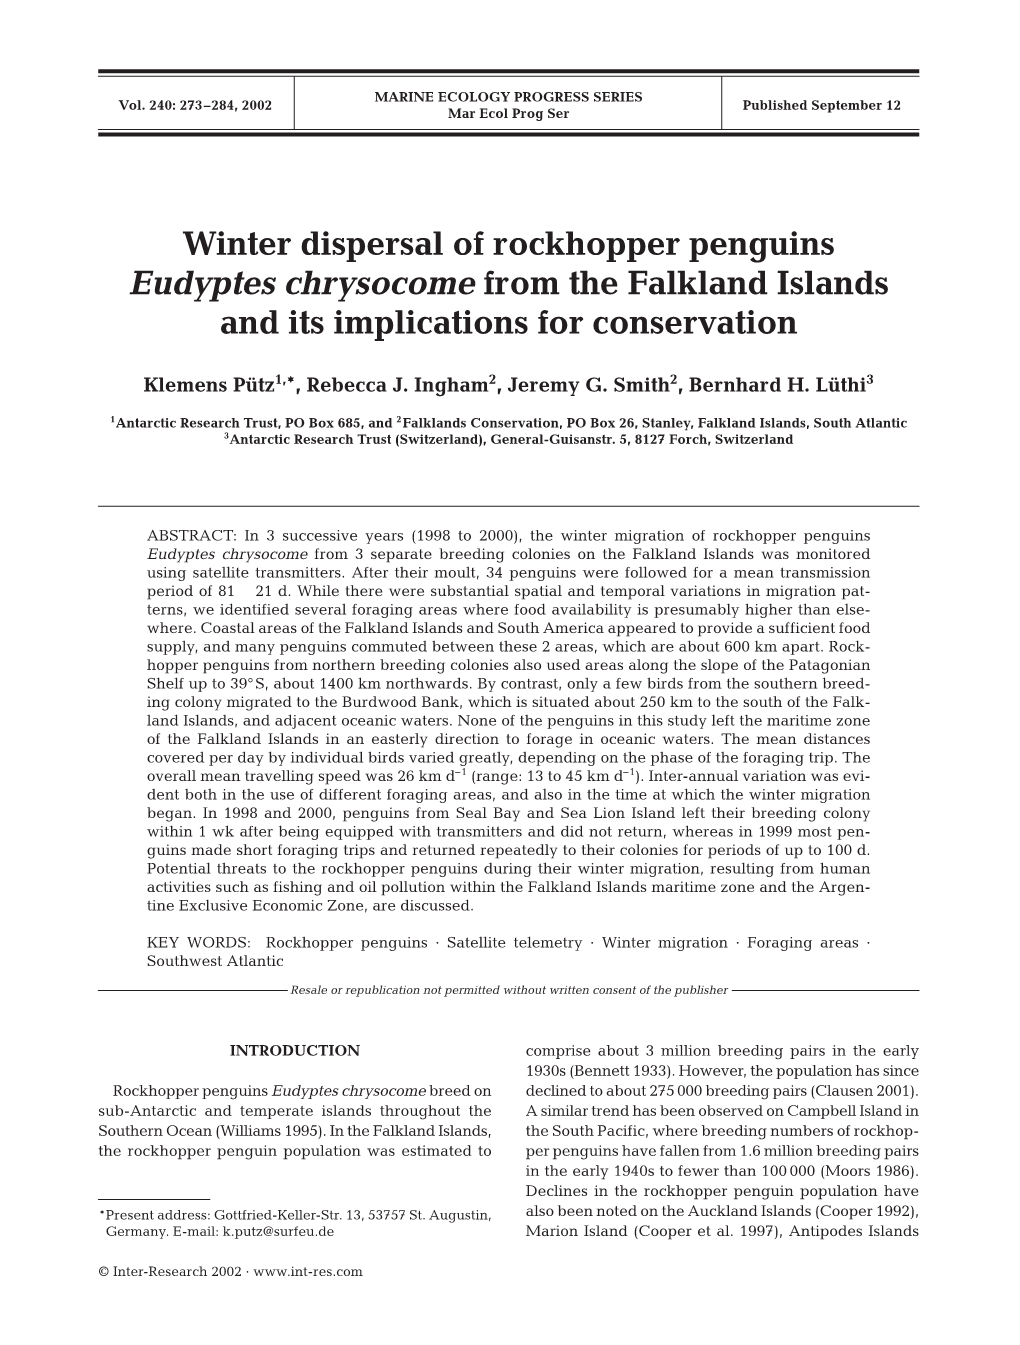 Winter Dispersal of Rockhopper Penguins Eudyptes Chrysocome from the Falkland Islands and Its Implications for Conservation